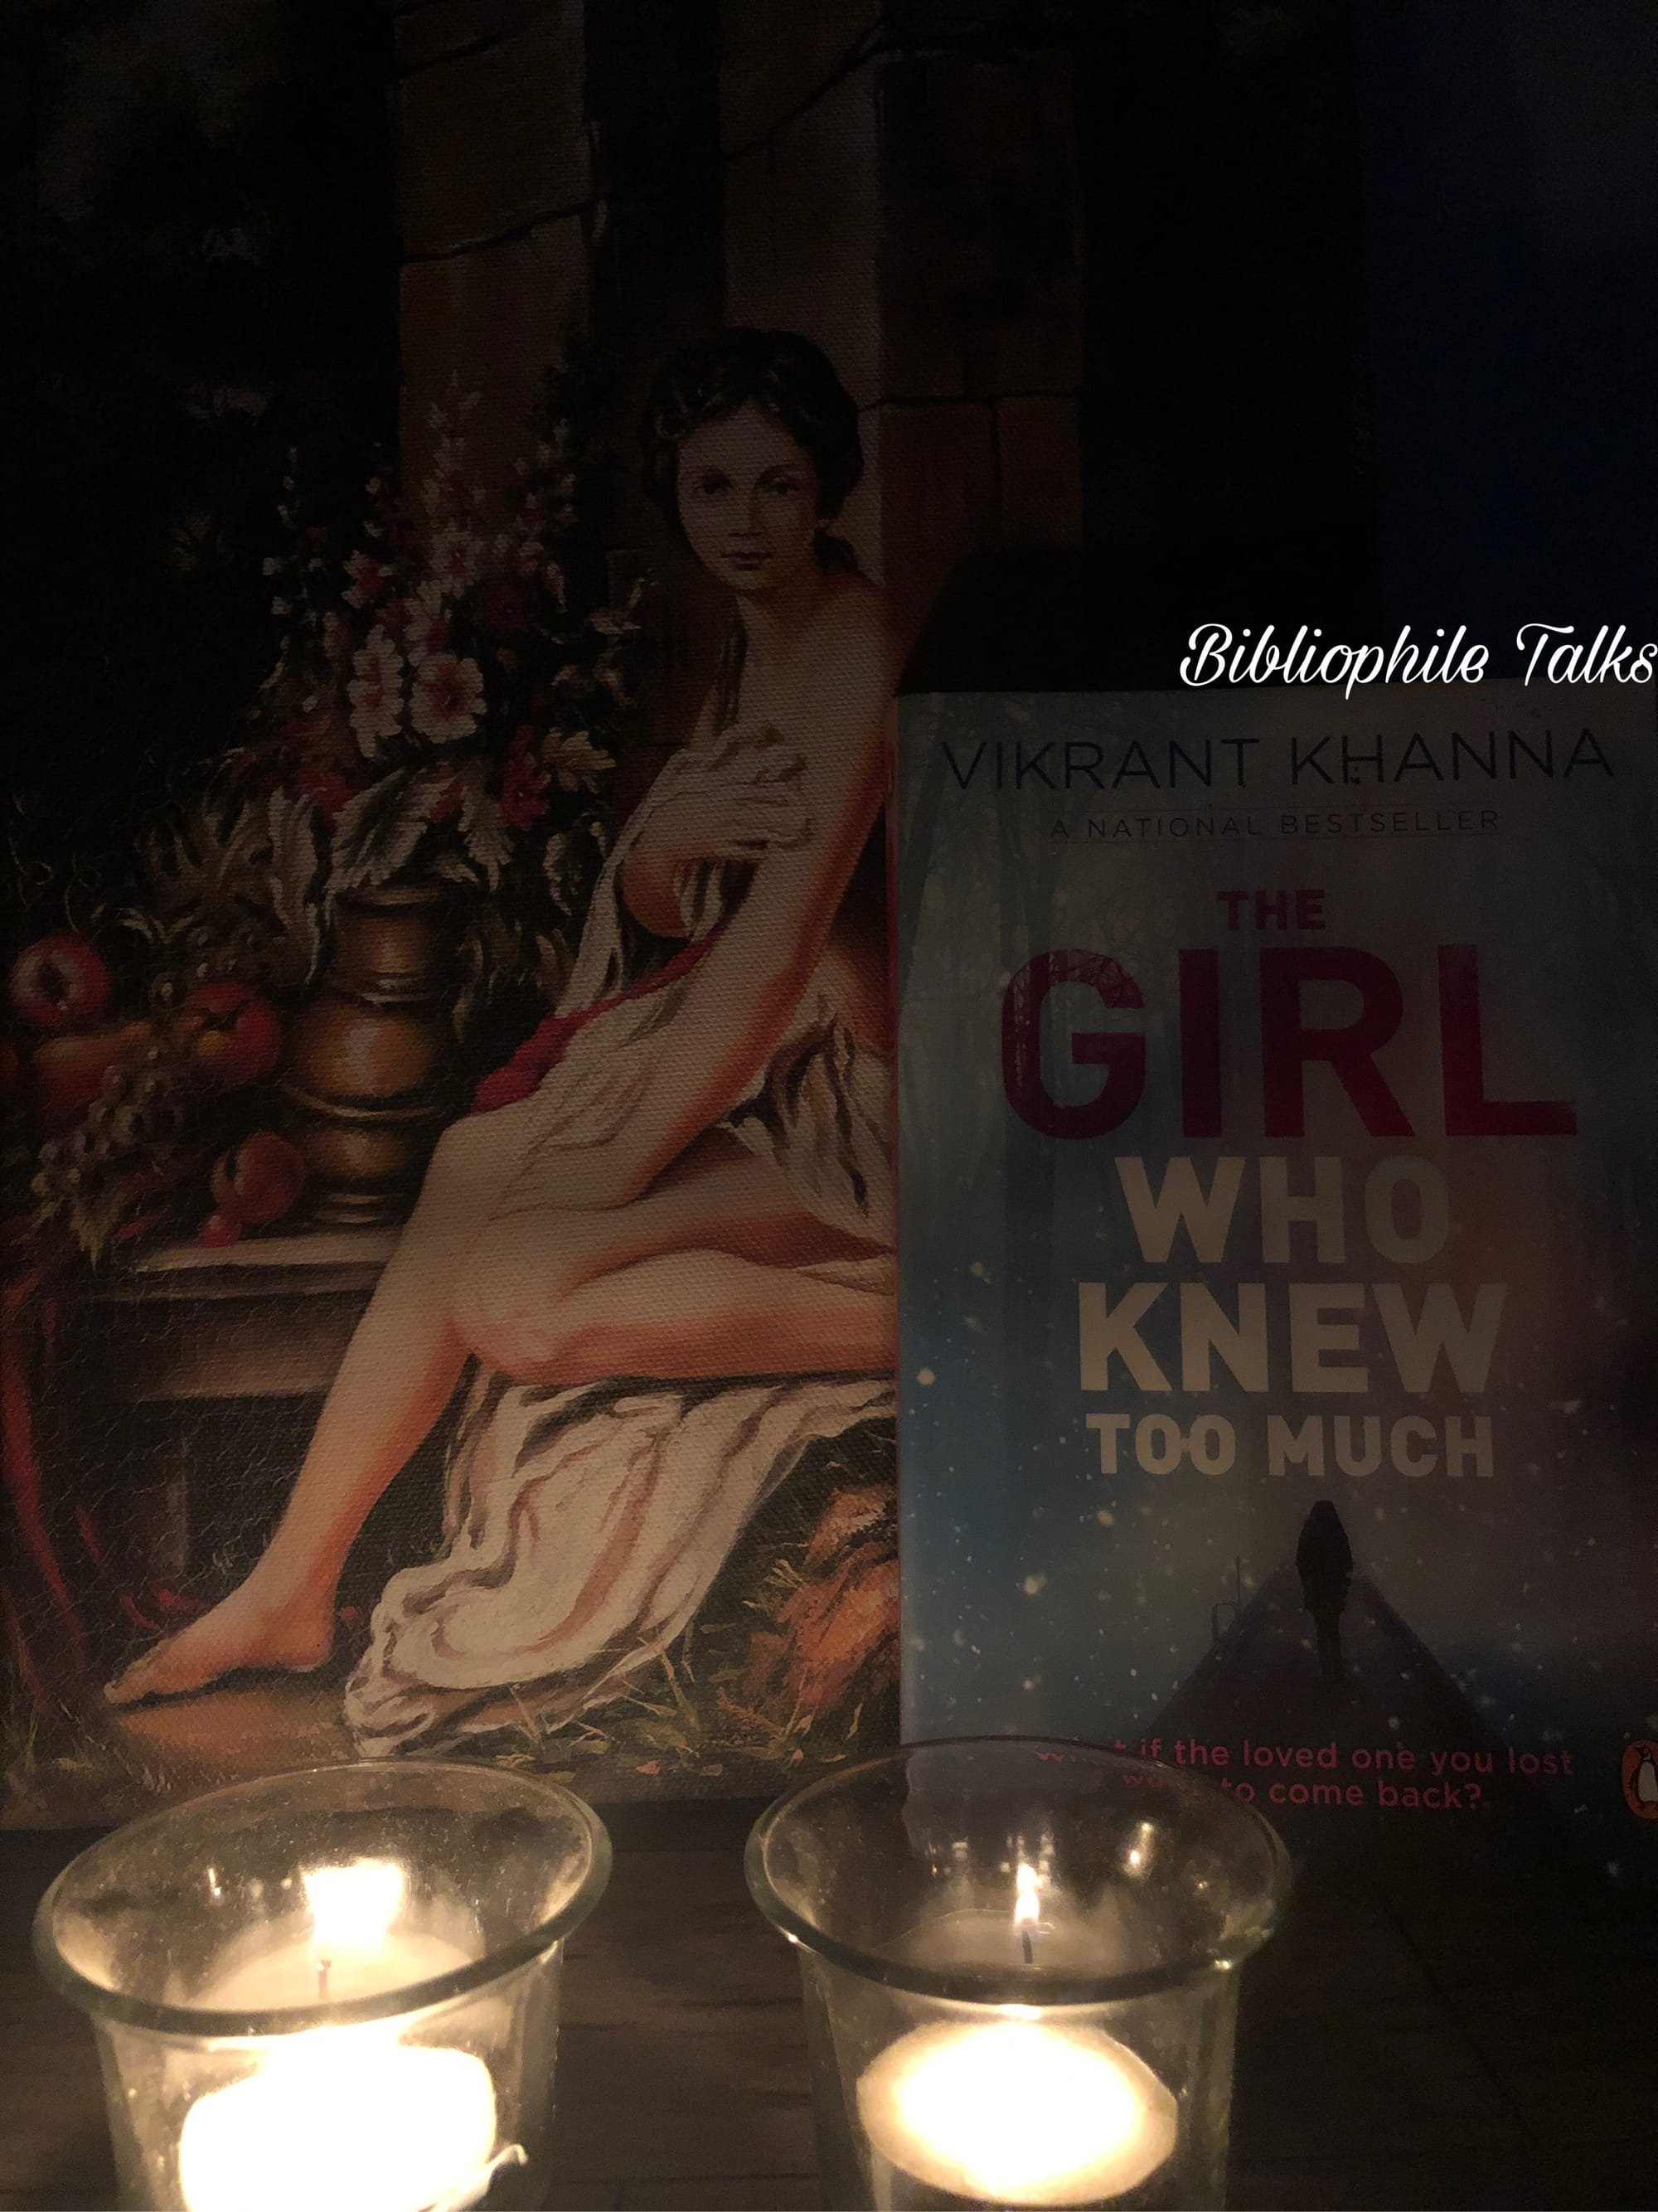 THE GIRL WHO KNEW TOO MUCH